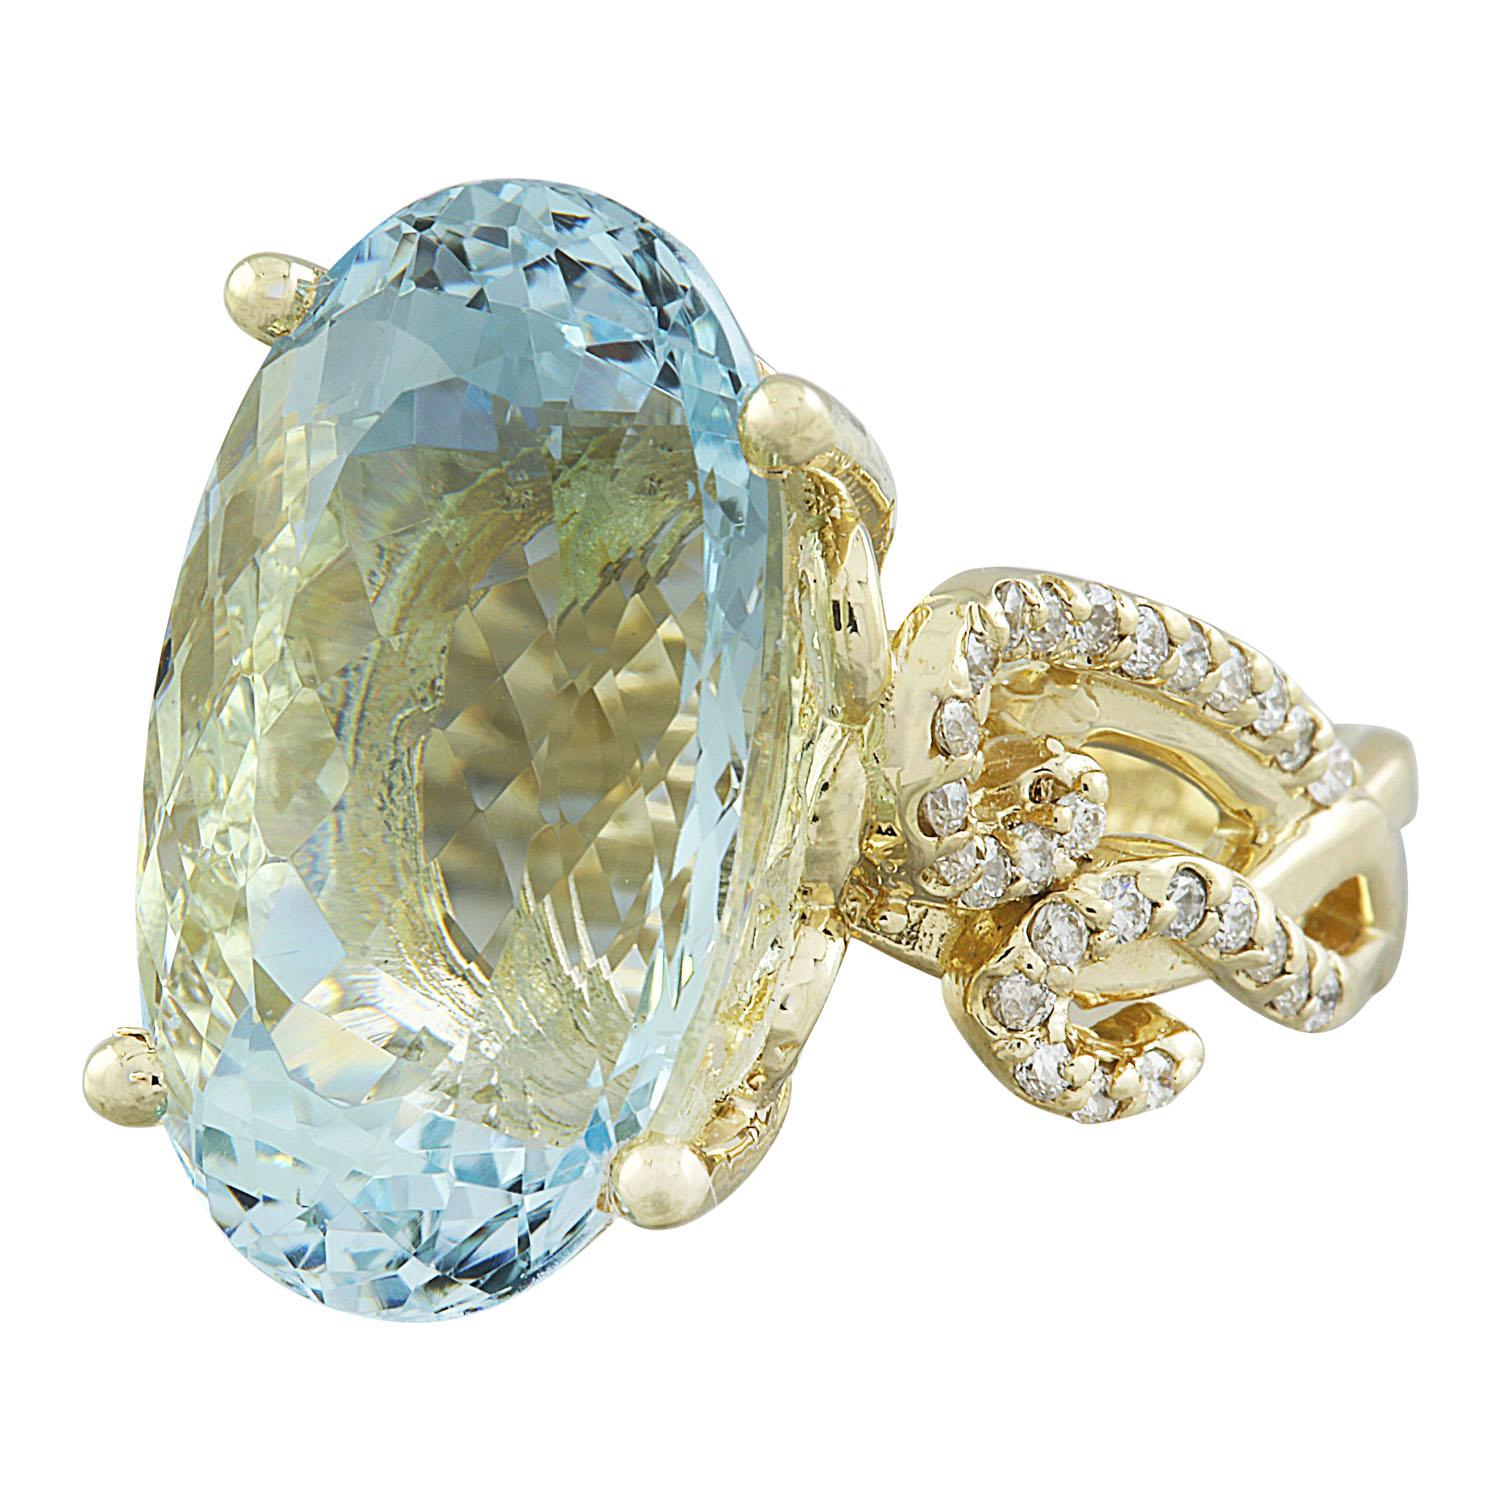 14.25 Carat Natural Aquamarine 14 Karat Solid Yellow Gold Diamond Ring
Stamped: 14K
Total Ring Weight: 10.8 Grams
Aquamarine Weight 13.75 Carat (18.00x12.00 Millimeters)
Diamond Weight: 0.50 carat (F-G Color, VS2-SI1 Clarity )
Face Measures: